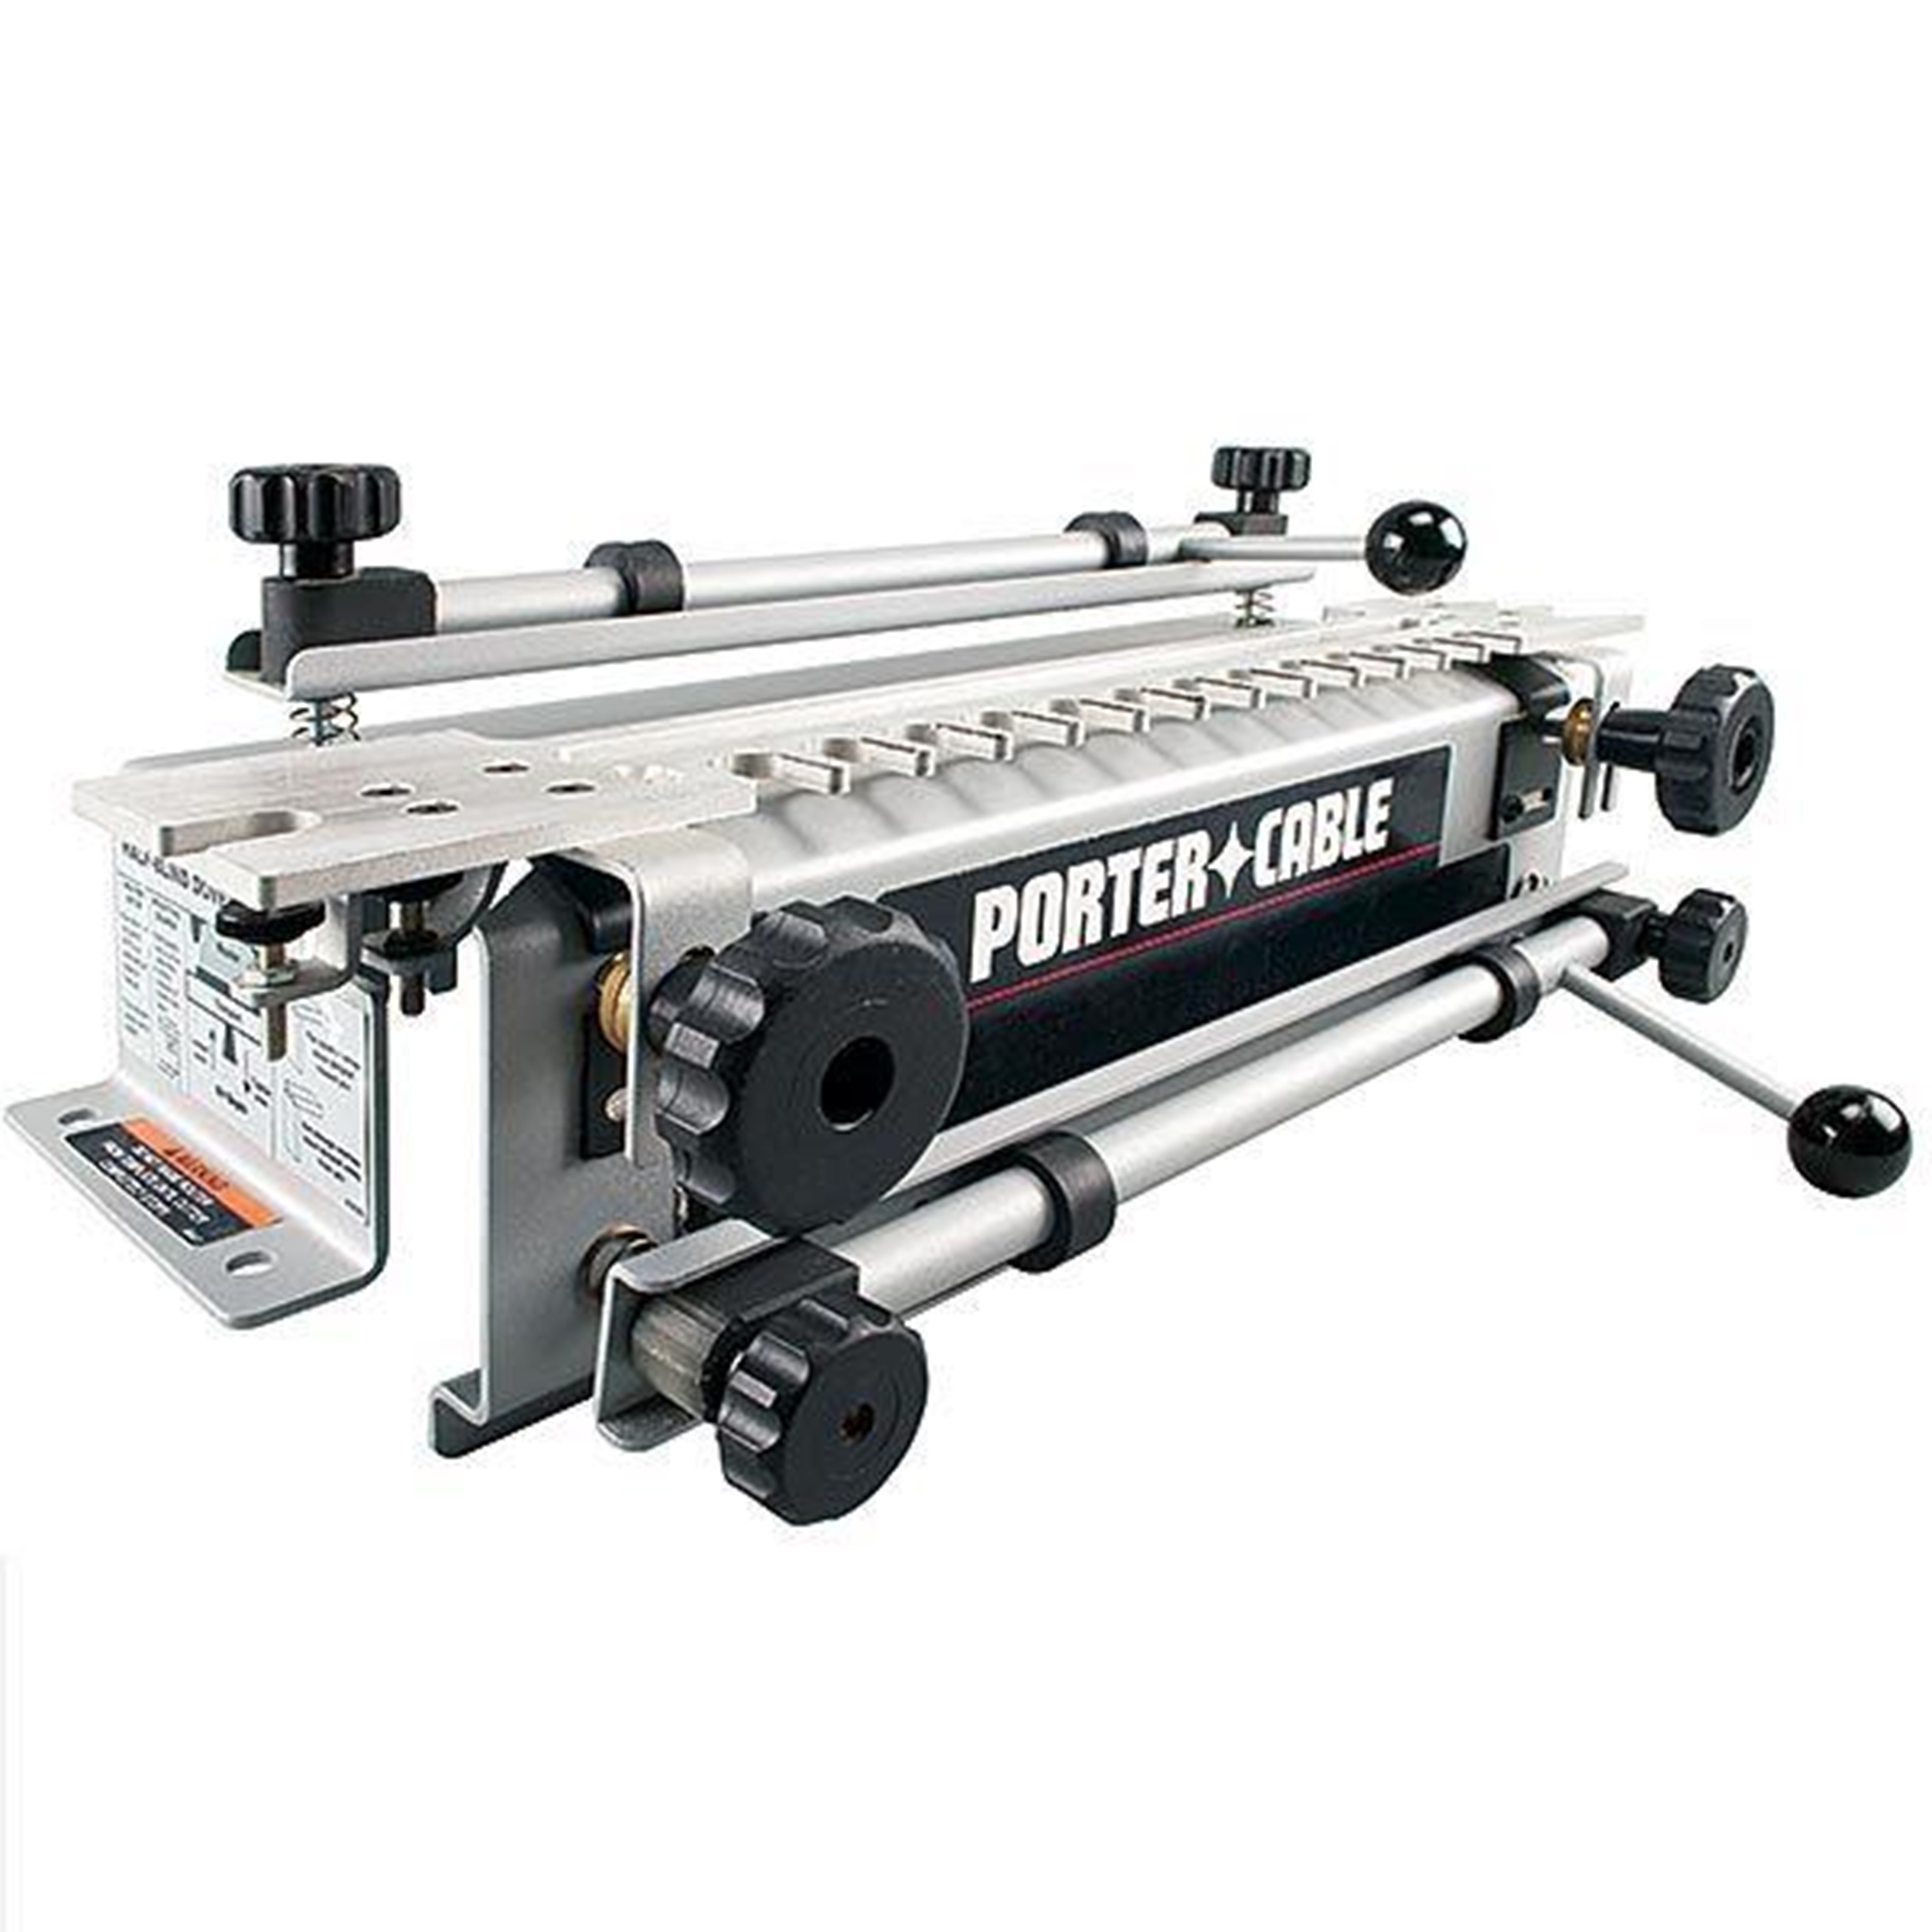 Porter-cable 12" Dovetail Jig, Model 4210